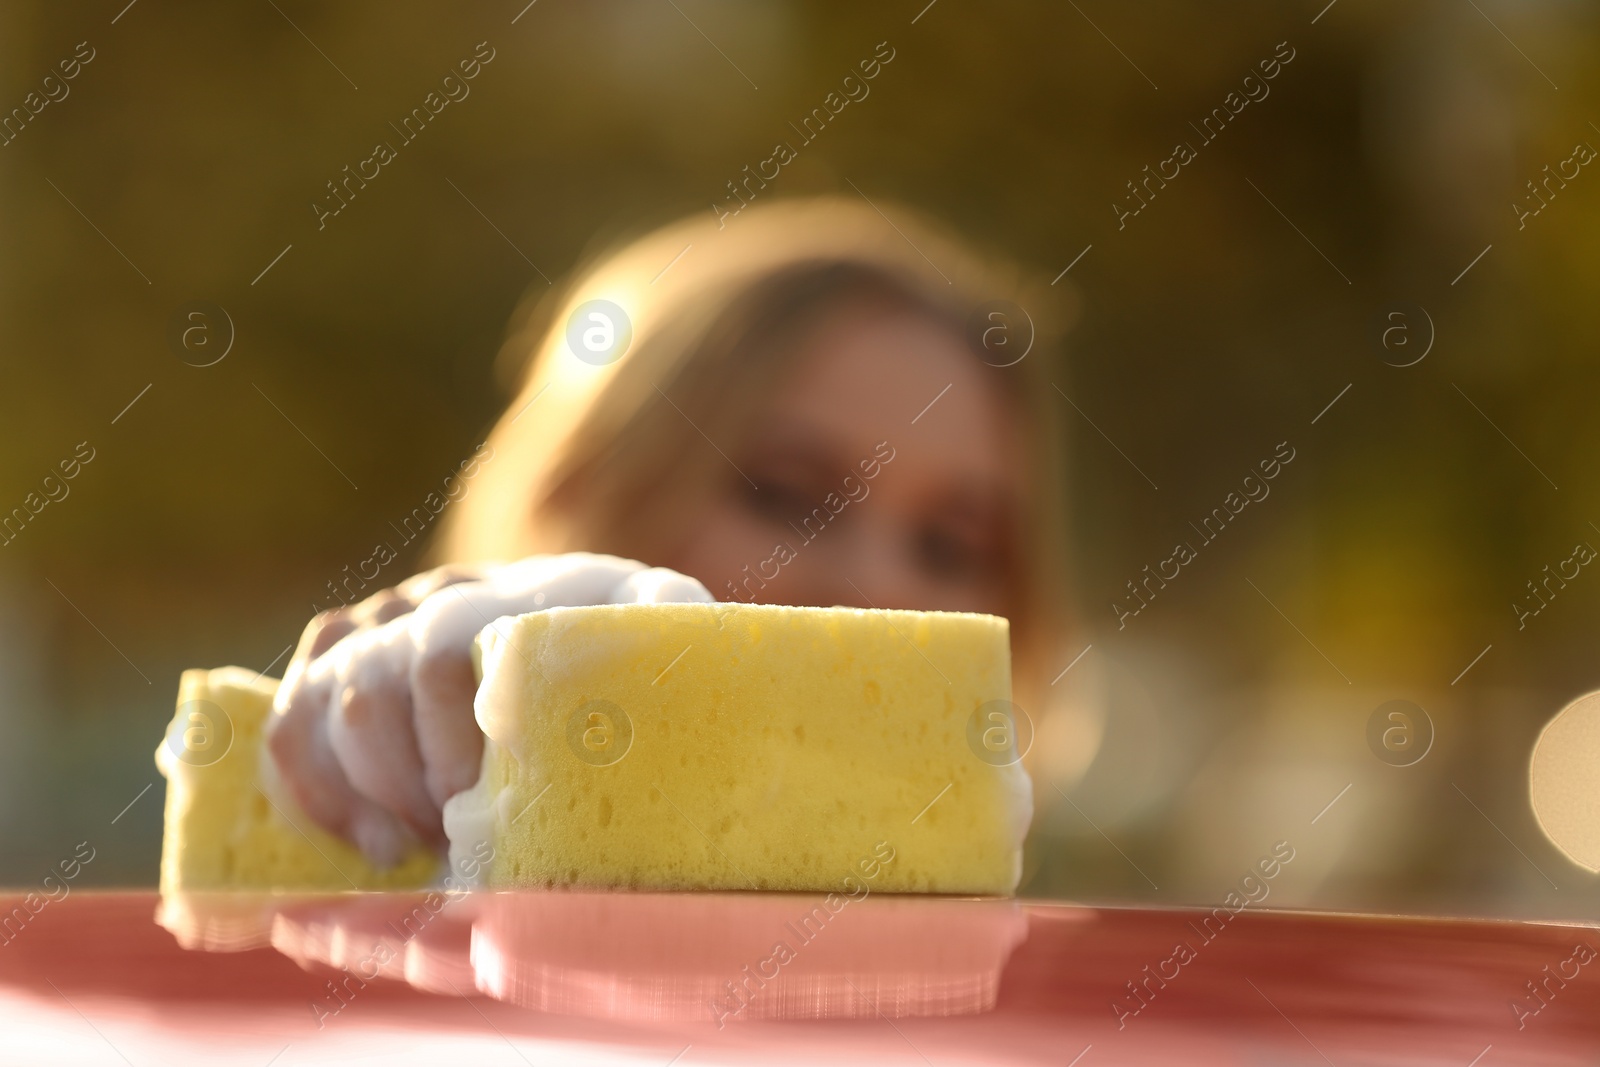 Photo of Young woman washing car outdoors, focus on sponge